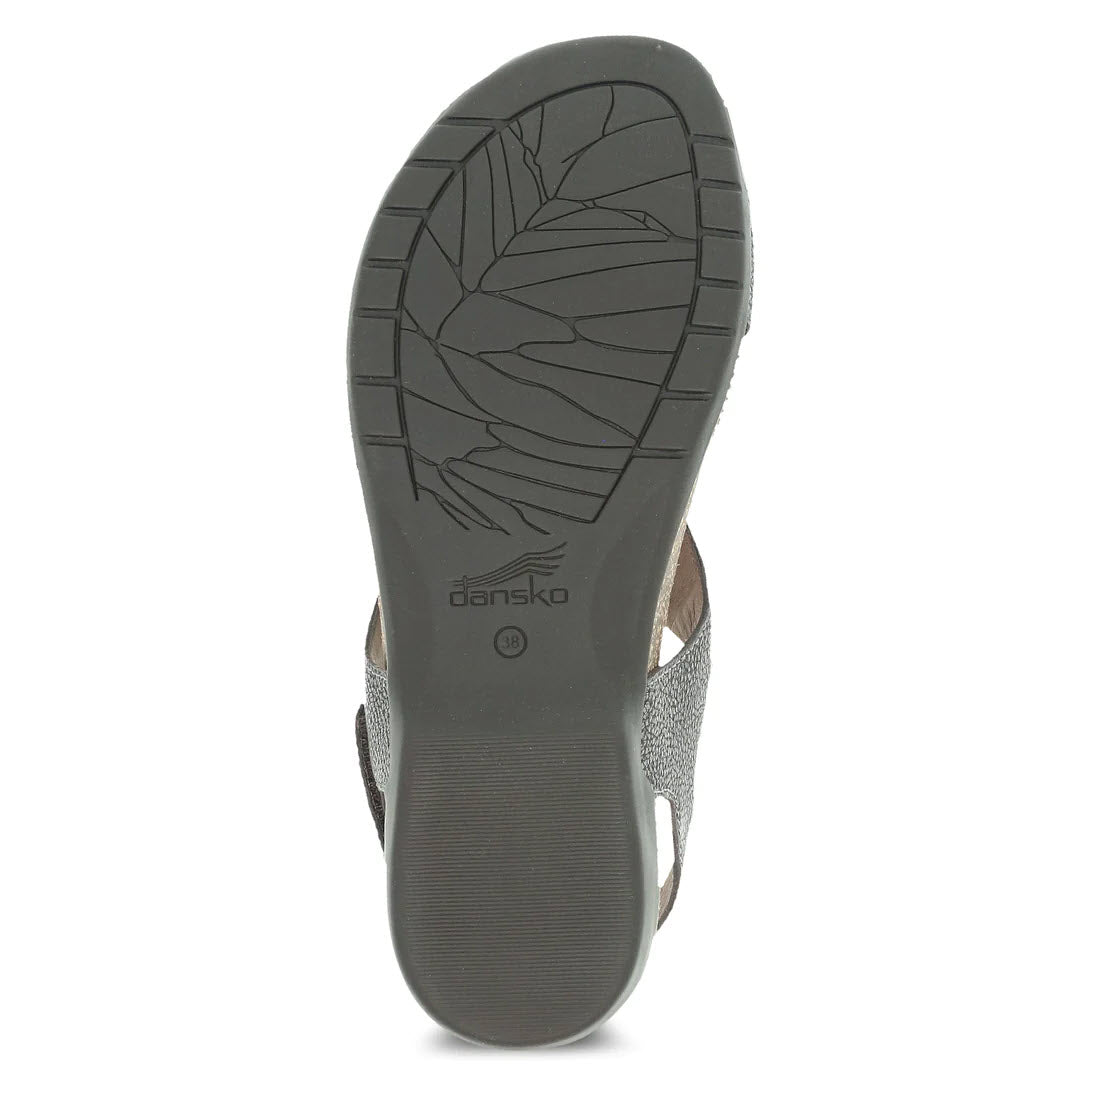 Bottom view of a gray Dansko Reece sandal showing the tread pattern and brand name on the sole.